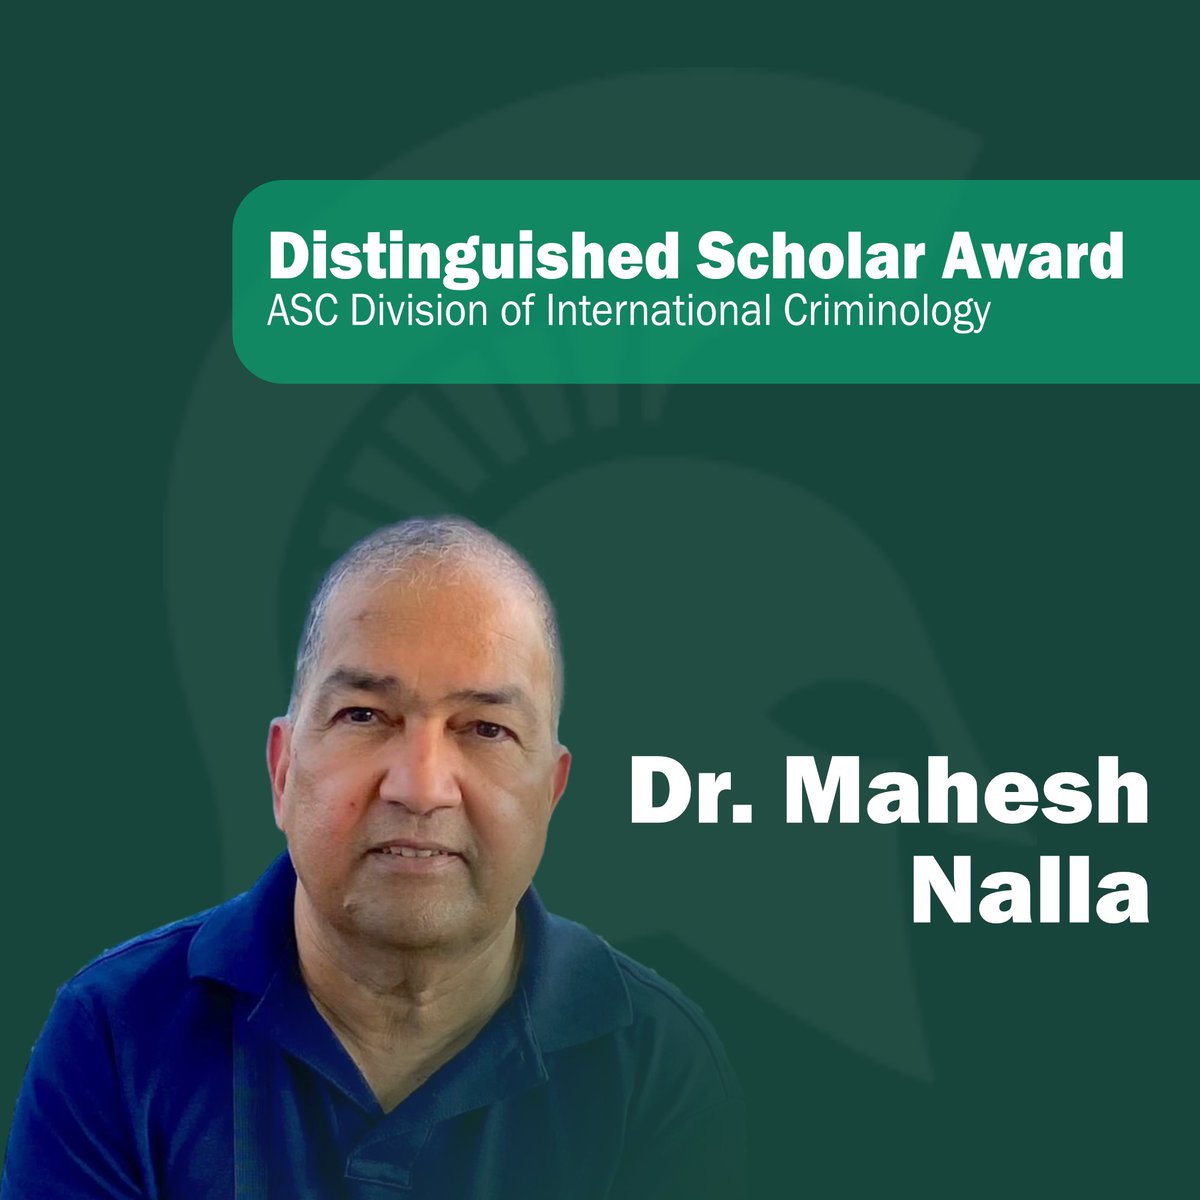 Dr. Mahesh Nalla has received the 2023 @ascdic Freda Adler Distinguished Scholar Award. Congratulations, Dr. Nalla – this award is well-earned!